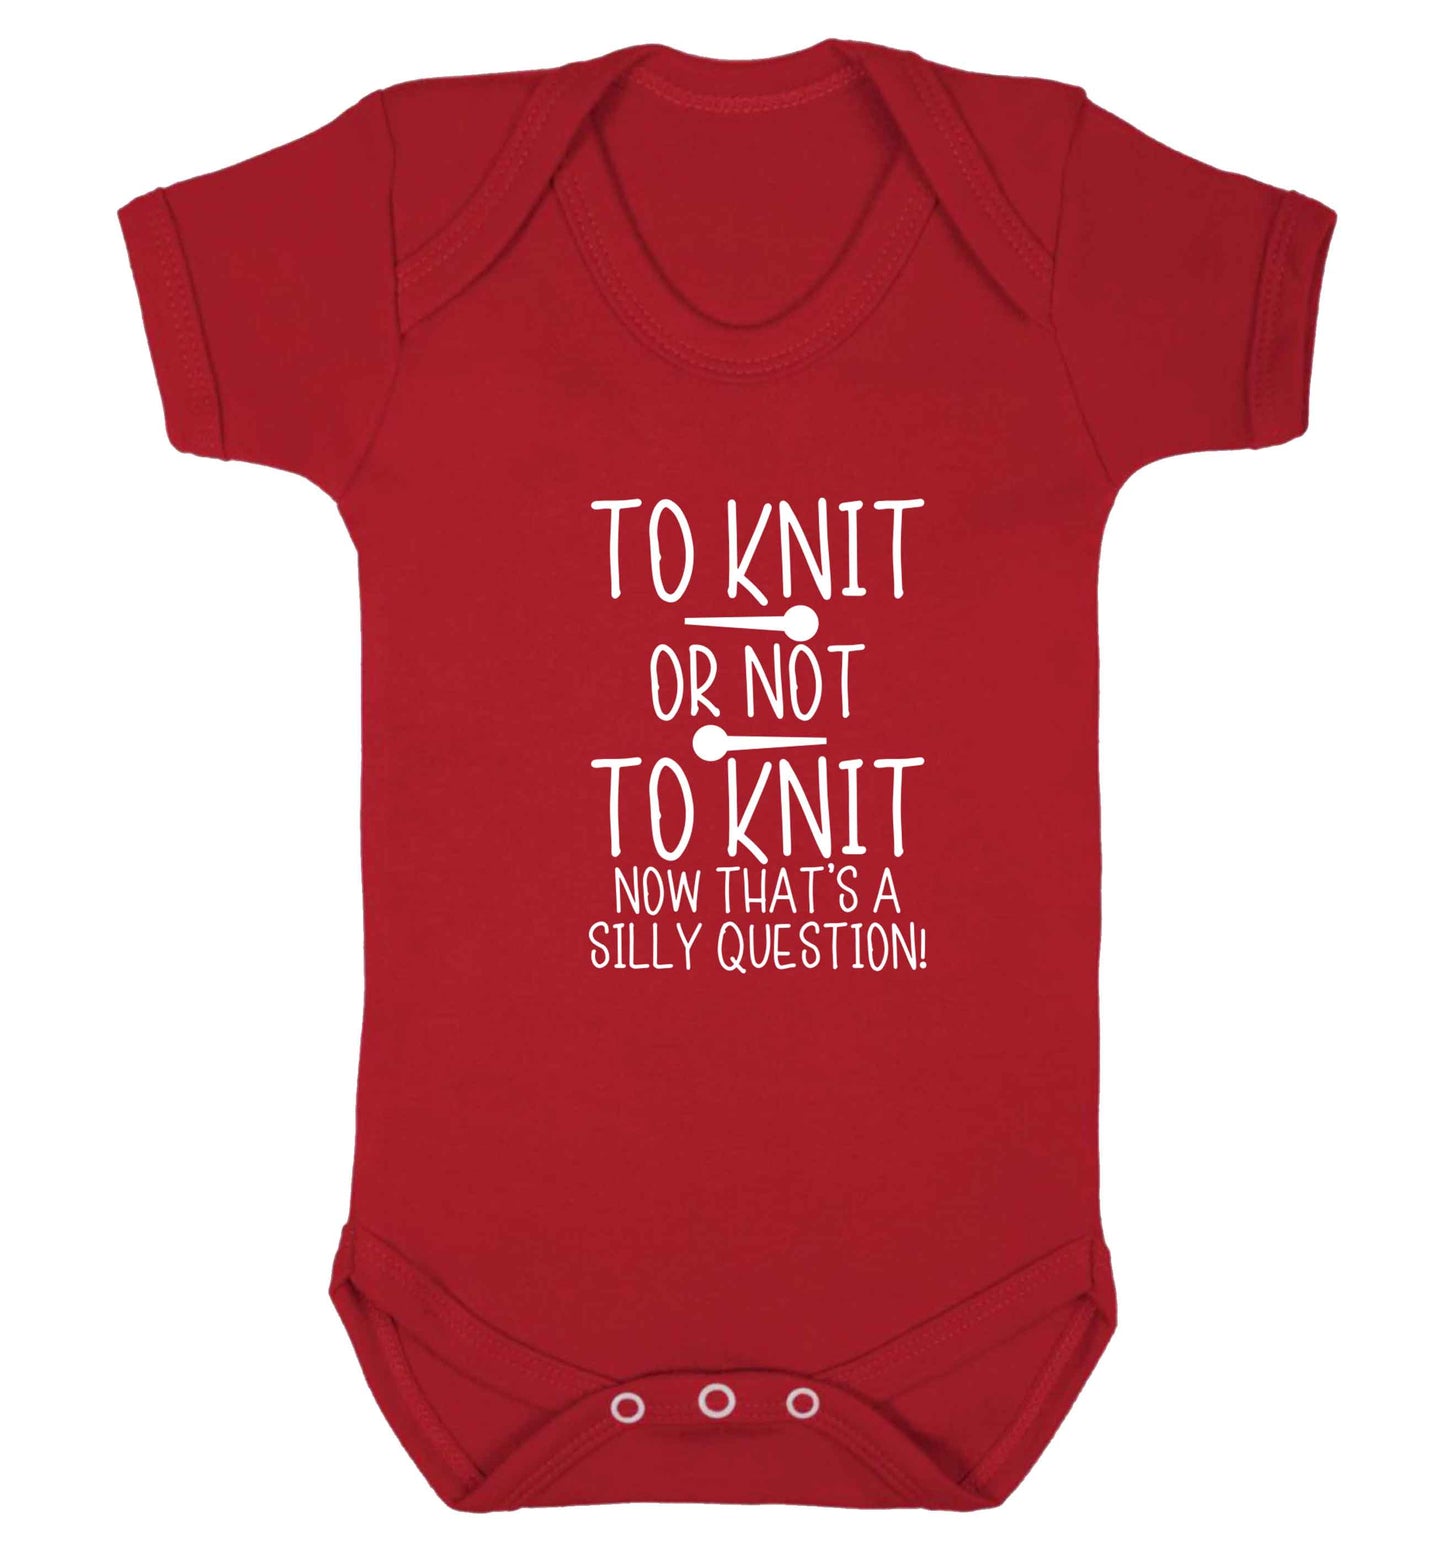 To knit or not to knit now that's a silly question baby vest red 18-24 months